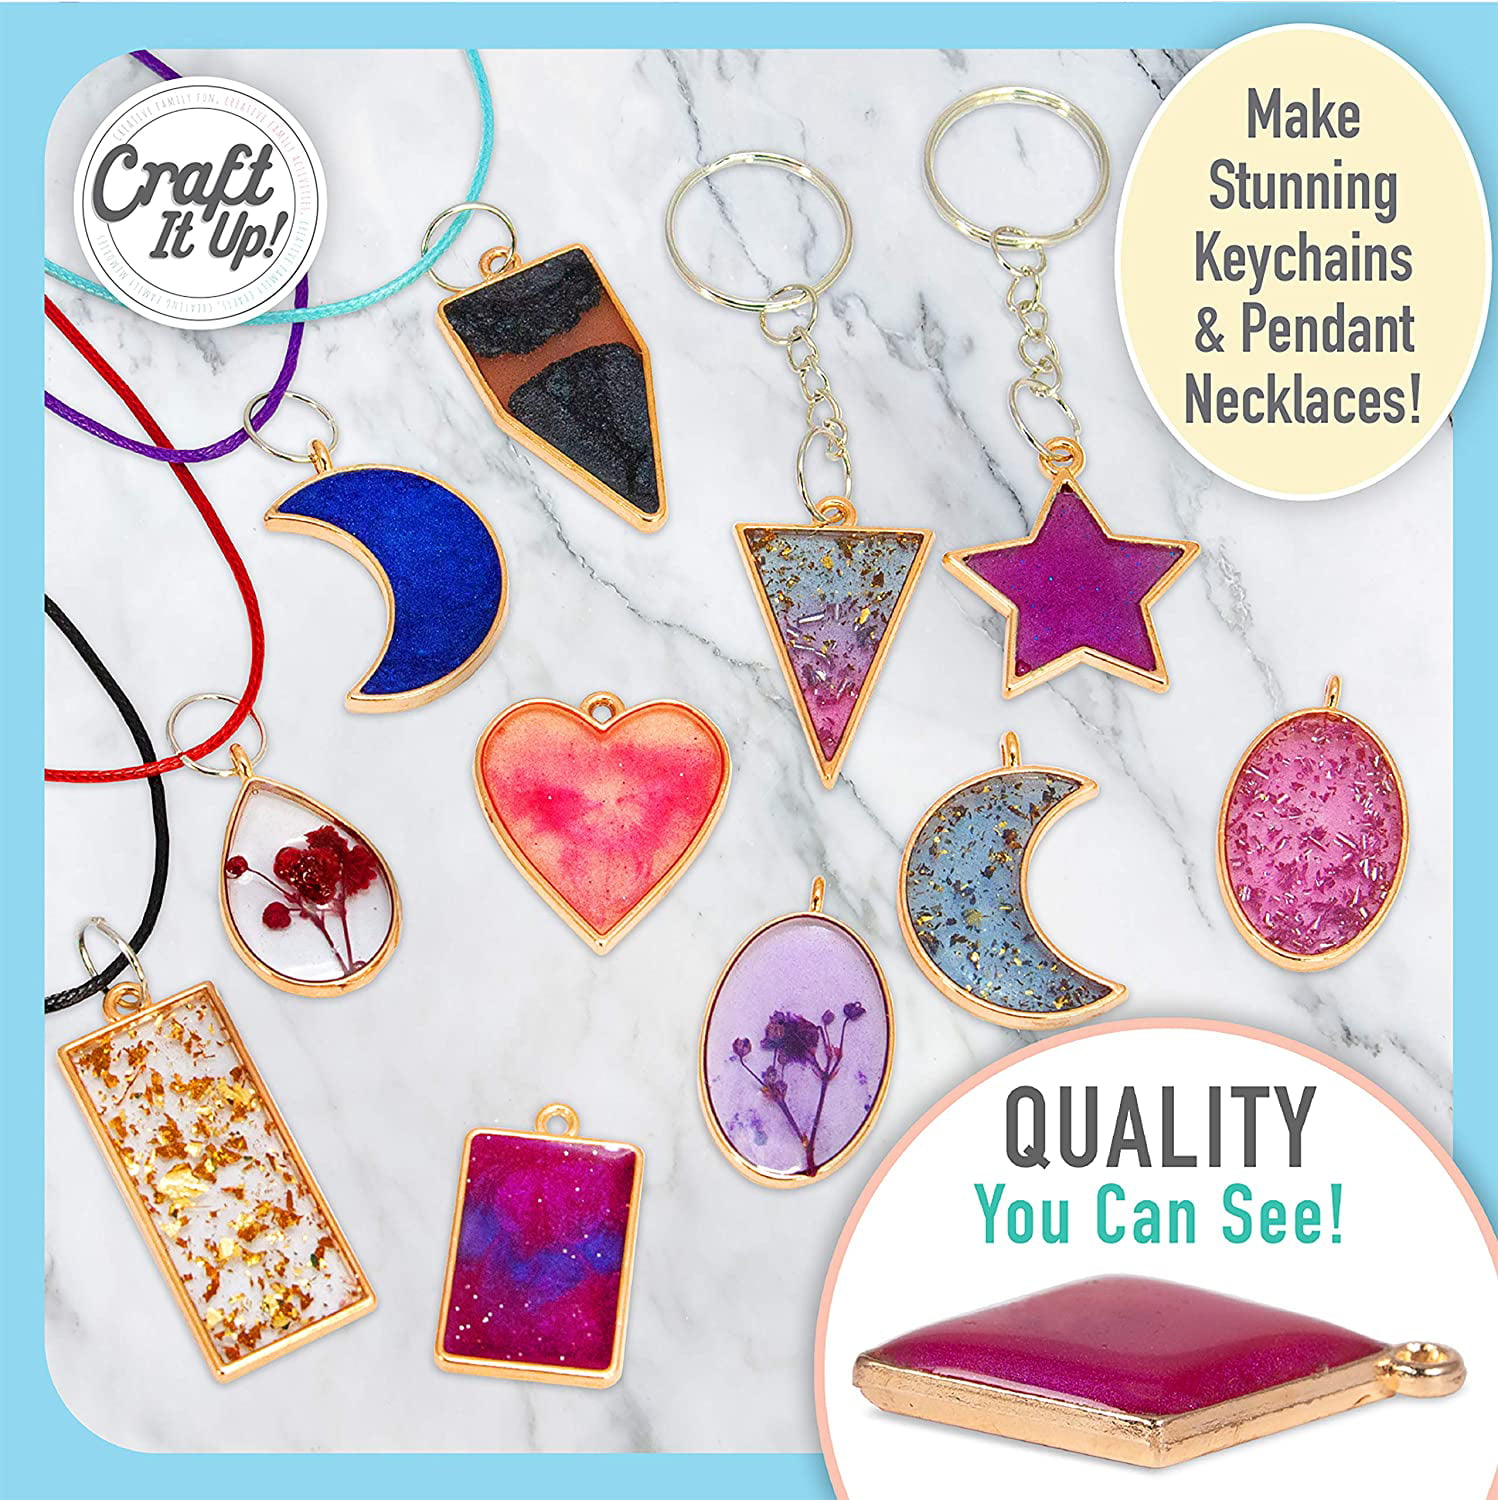 Resin Kit by Craft It Up! - Complete Starter Jewelry Making Resin Kit for  Beginners - All Inclusive Craft Resin Starter Kit - Epoxy Resin Kit with  Molds, Charms, Dyes & Dry